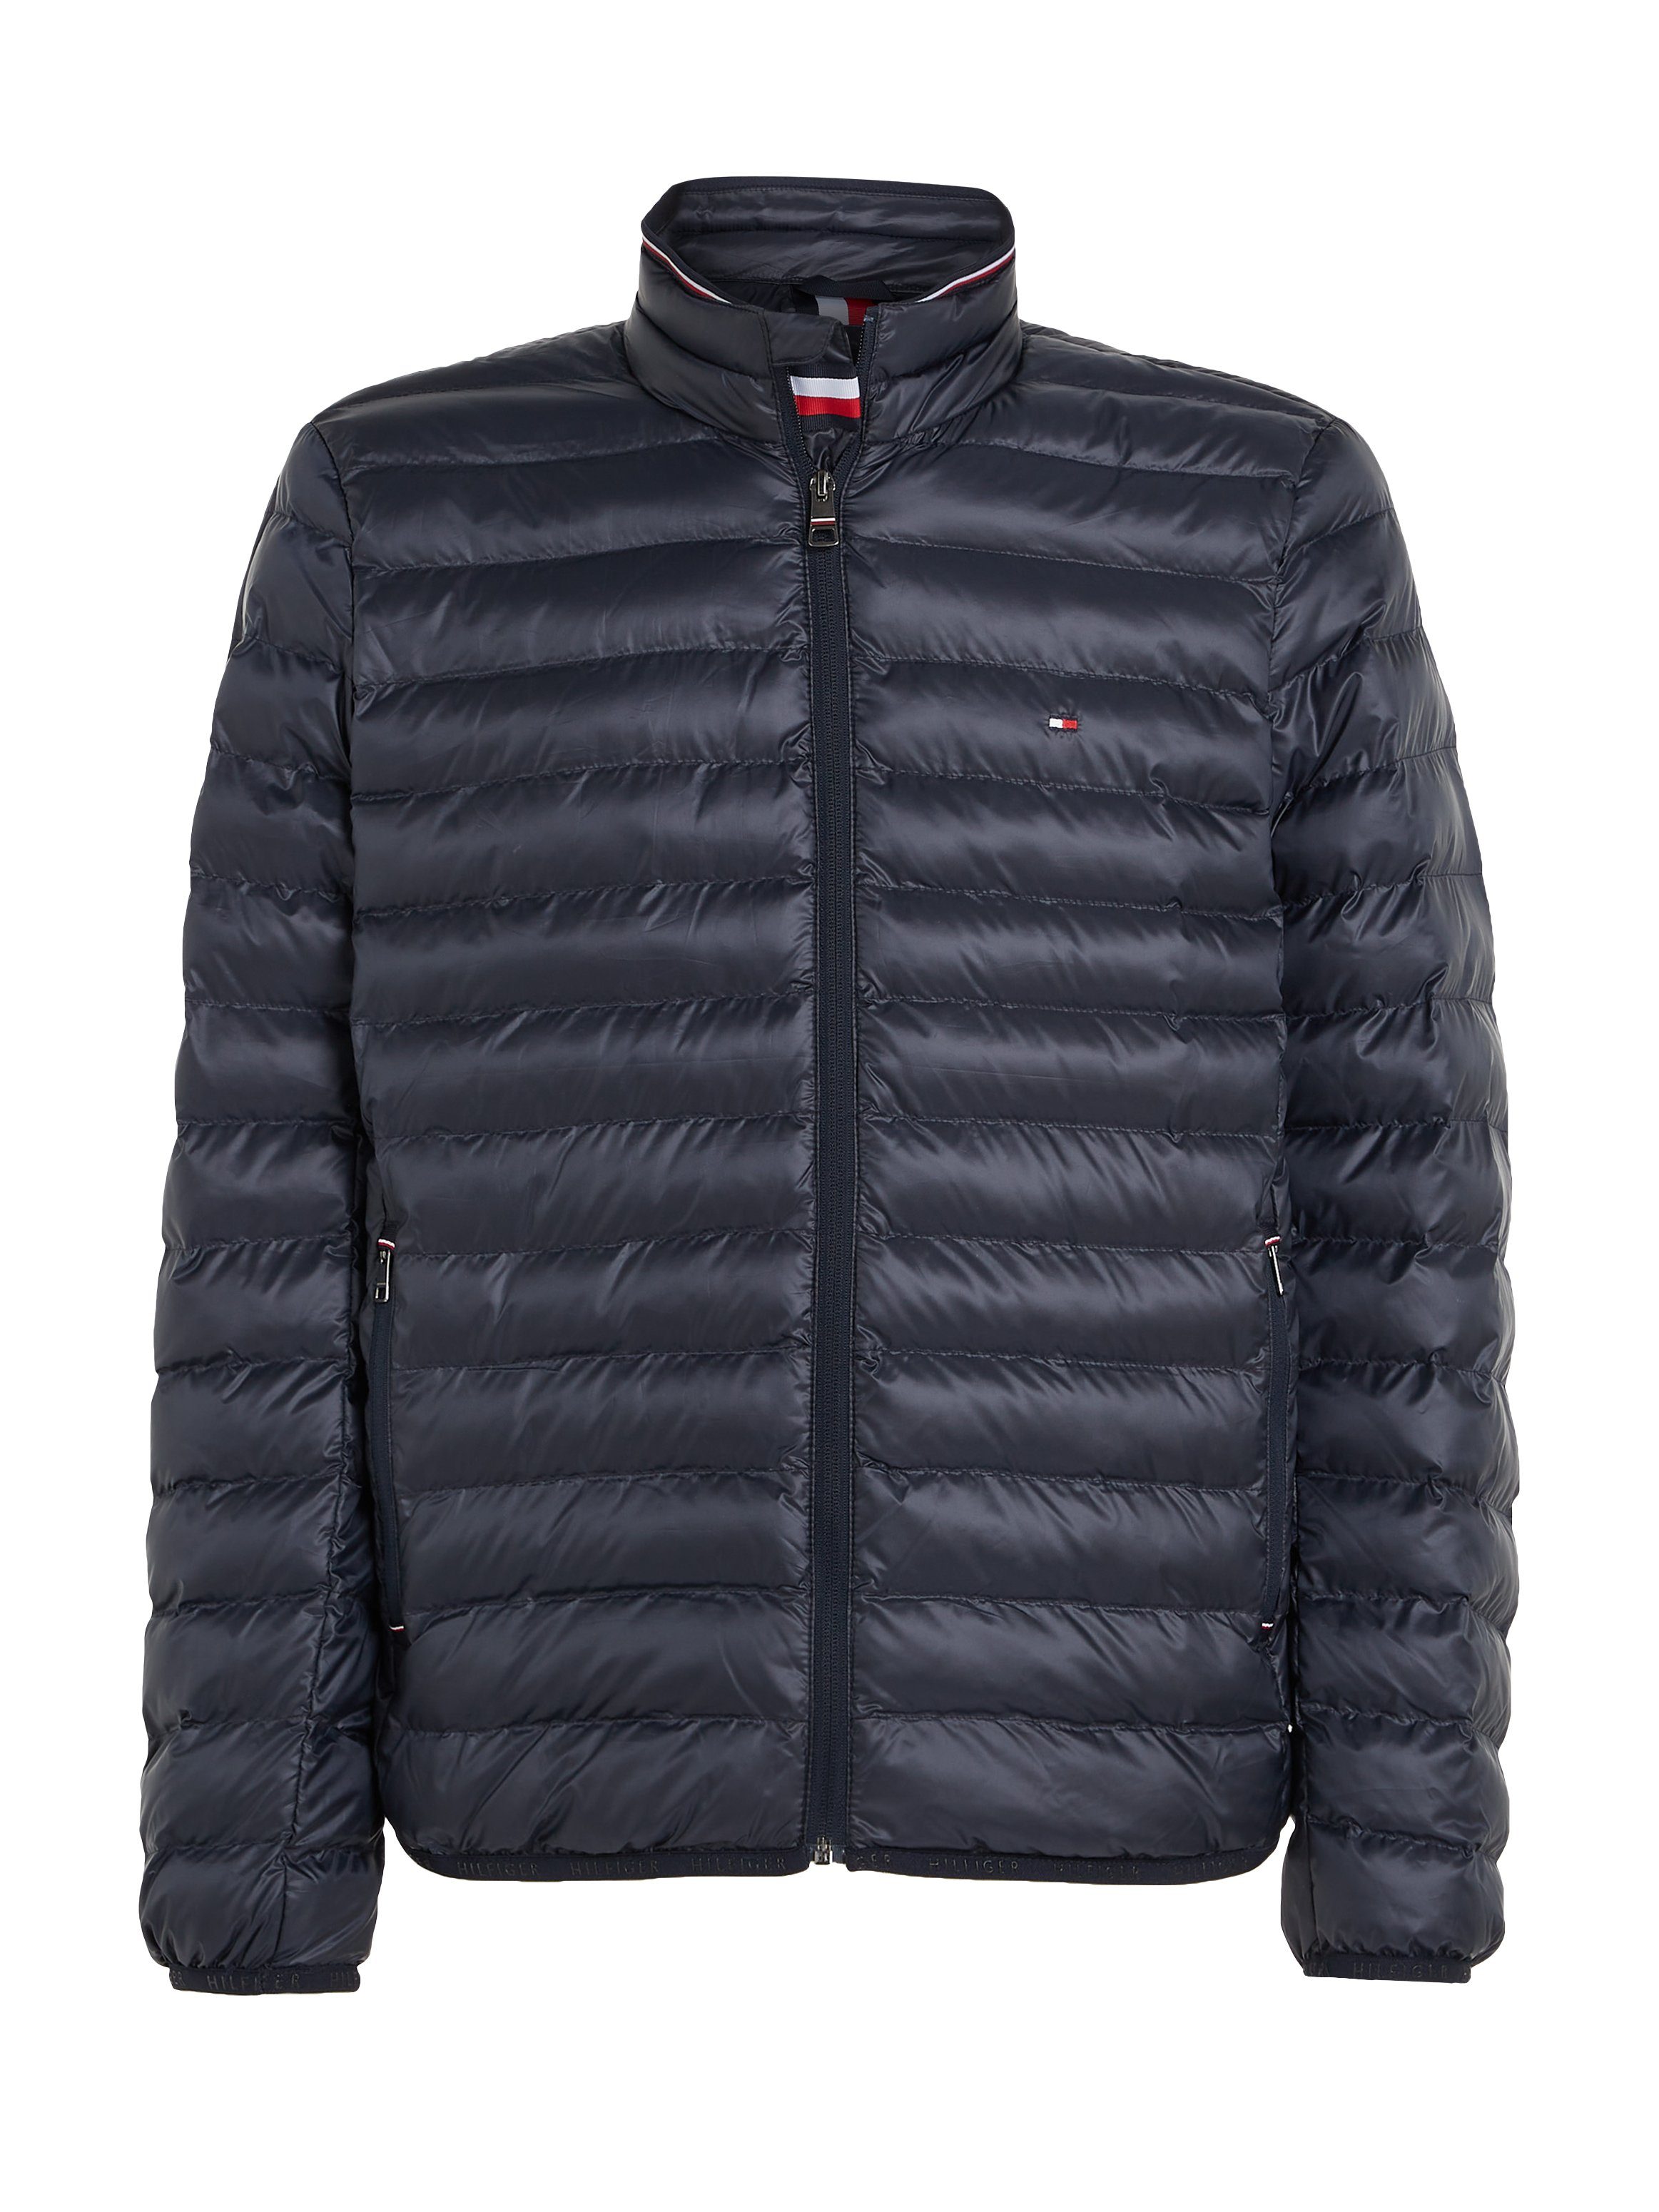 JACKET PACKABLE sky Steppjacke desert Hilfiger CORE RECYCLED Tommy